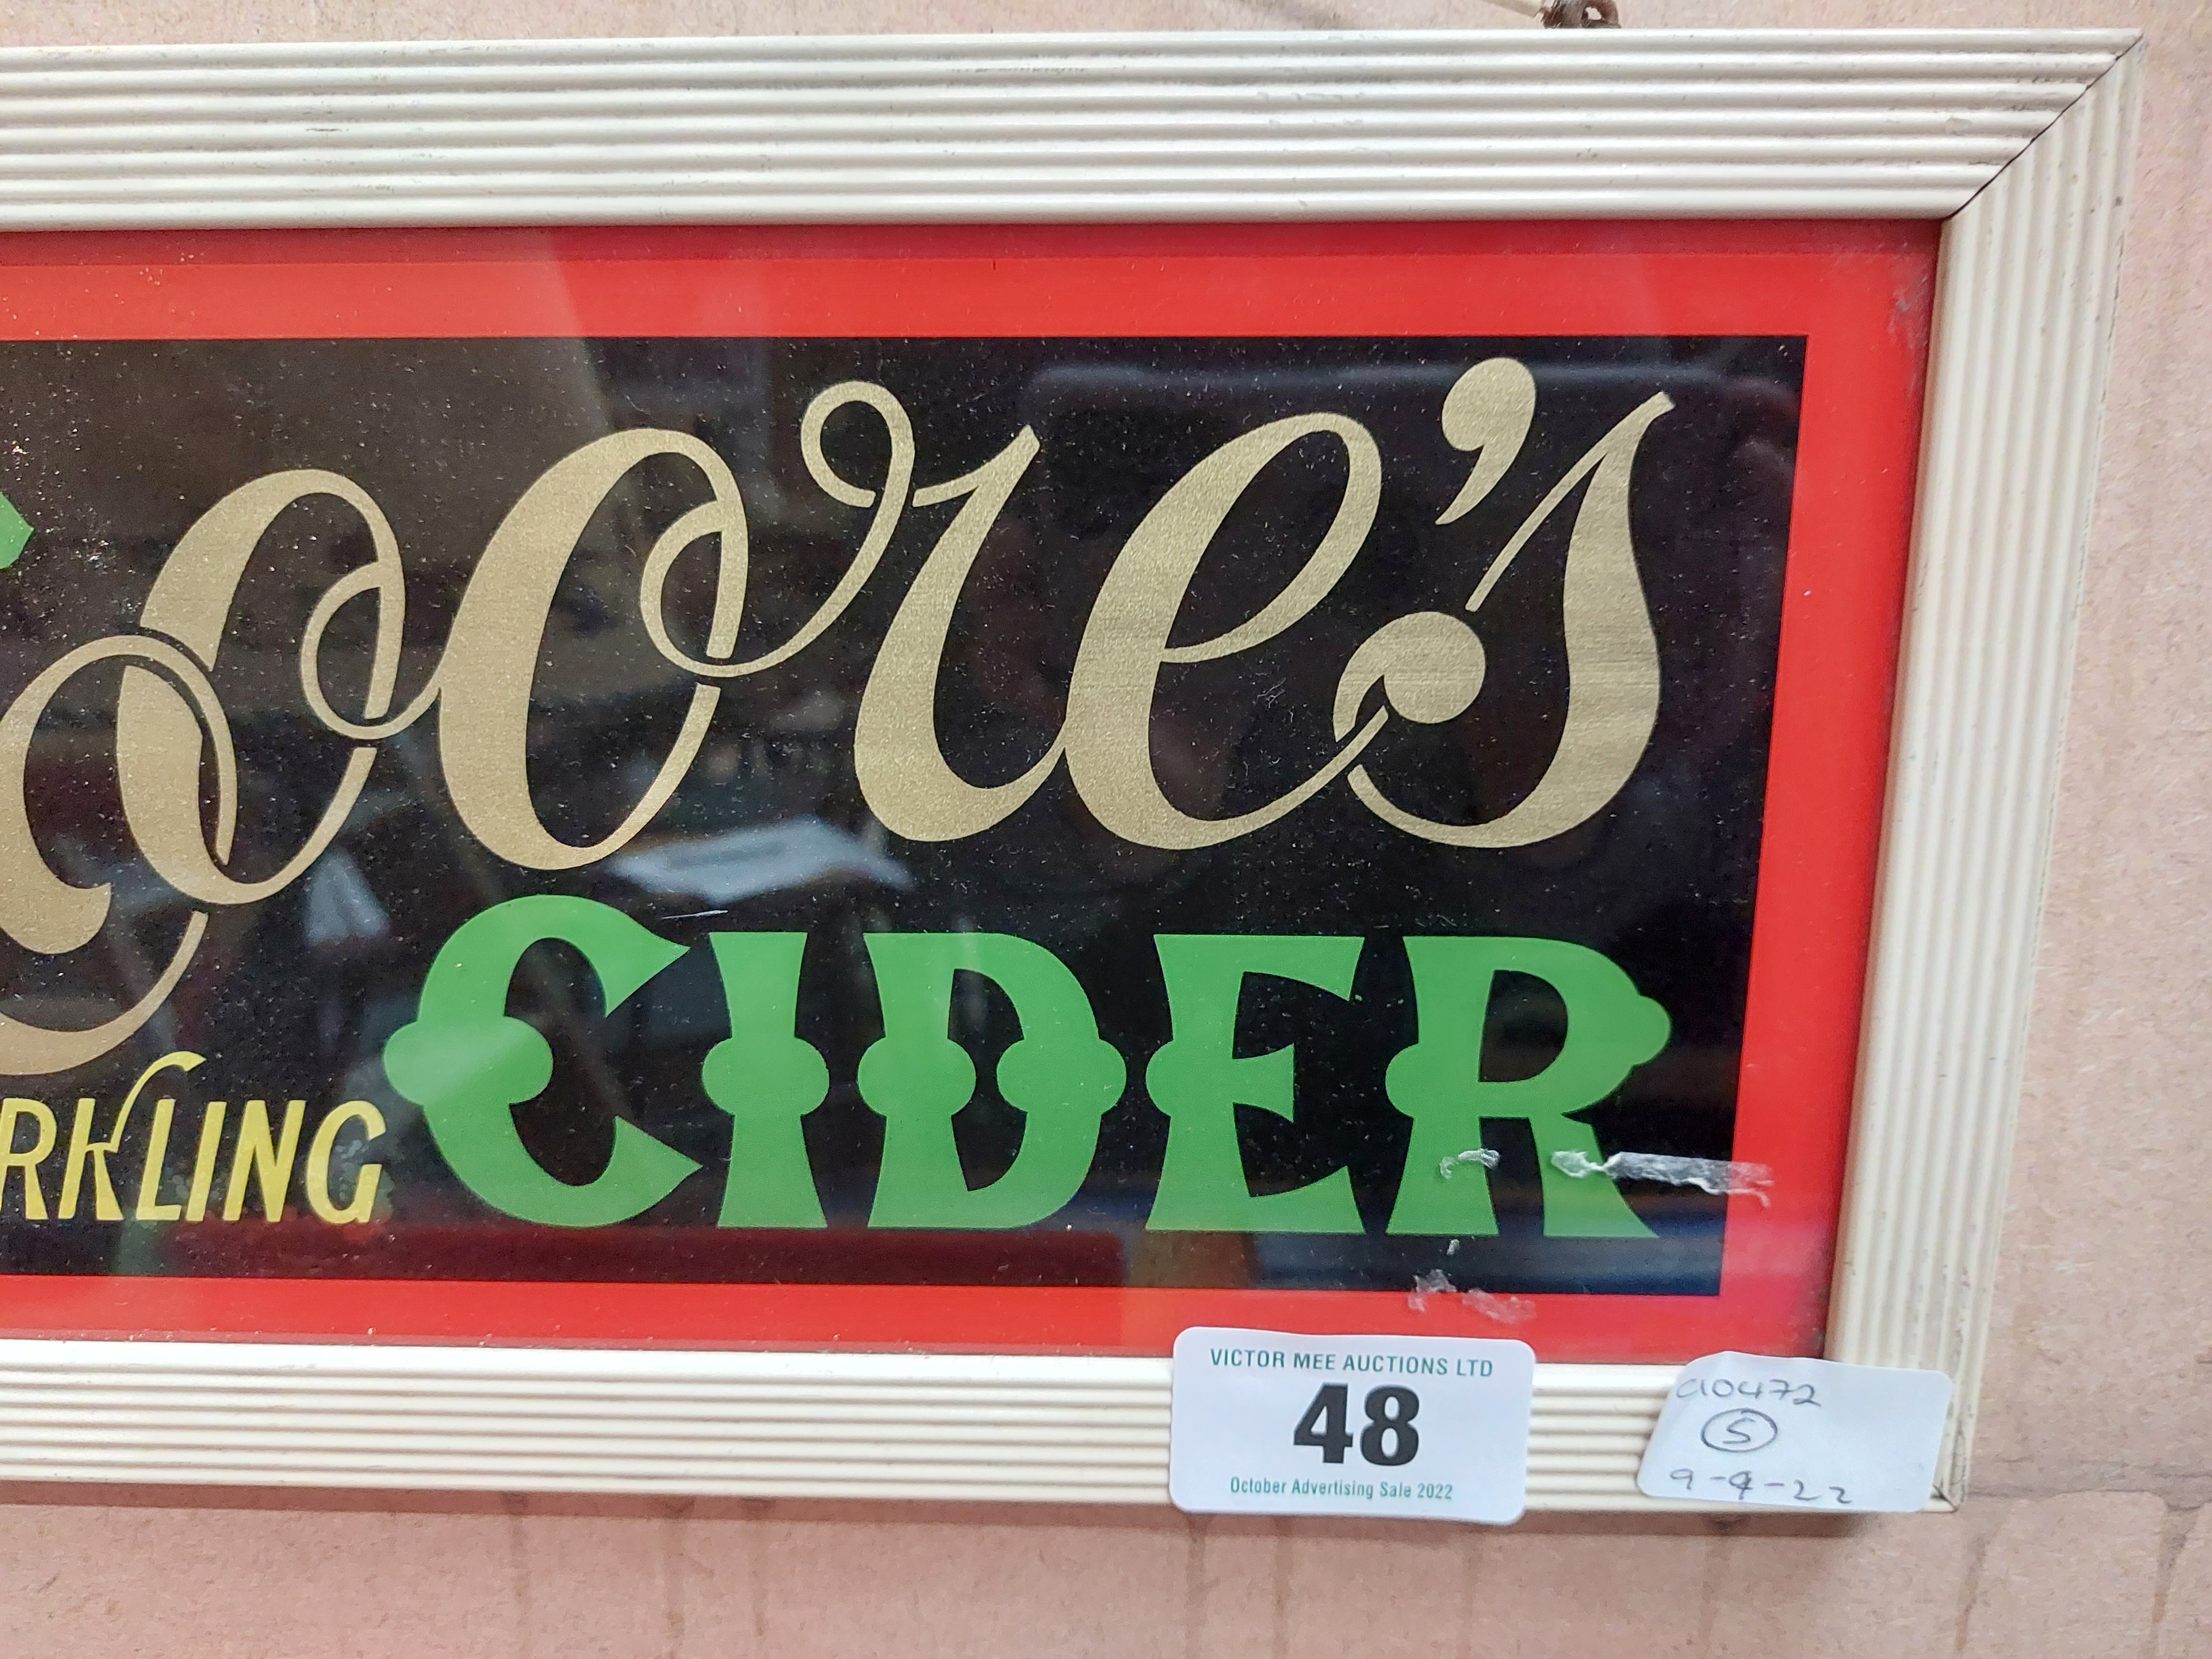 Moore's Sparkling Cider reverse painted glass framed advertisement . {18 cm H x 41 cm W}. - Image 3 of 3